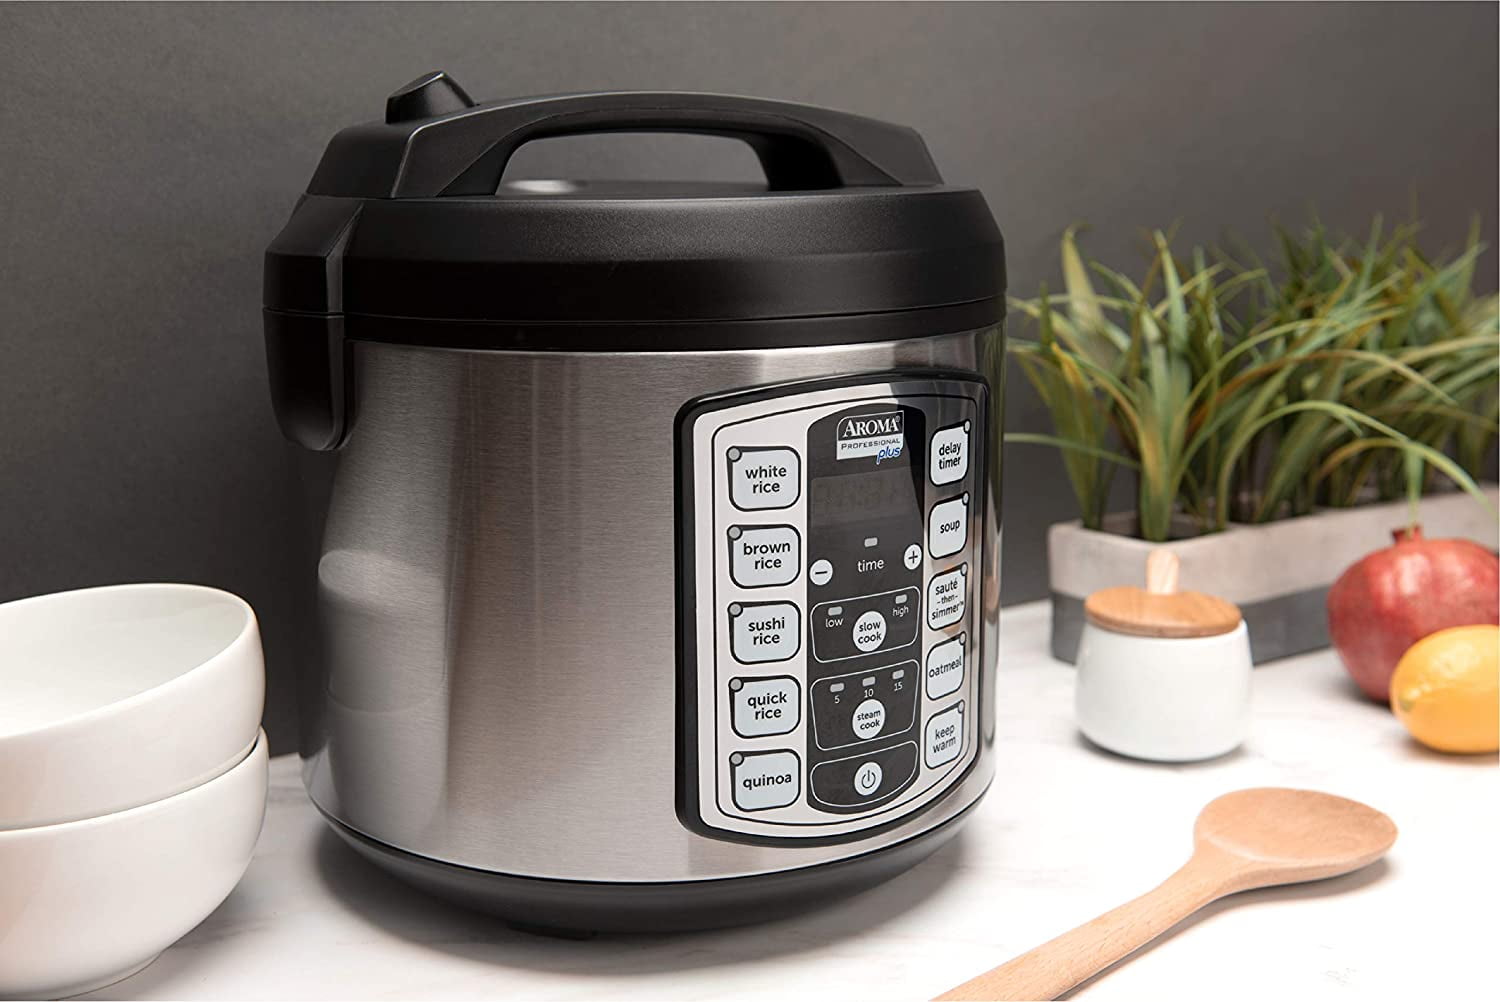  Aroma Housewares ARC-5000SB Digital Rice, Food Steamer, Slow,  Grain Cooker, Stainless Exterior/Nonstick Pot, 10-cup uncooked/20-cup  cooked/4QT, Silver, Black: Home & Kitchen